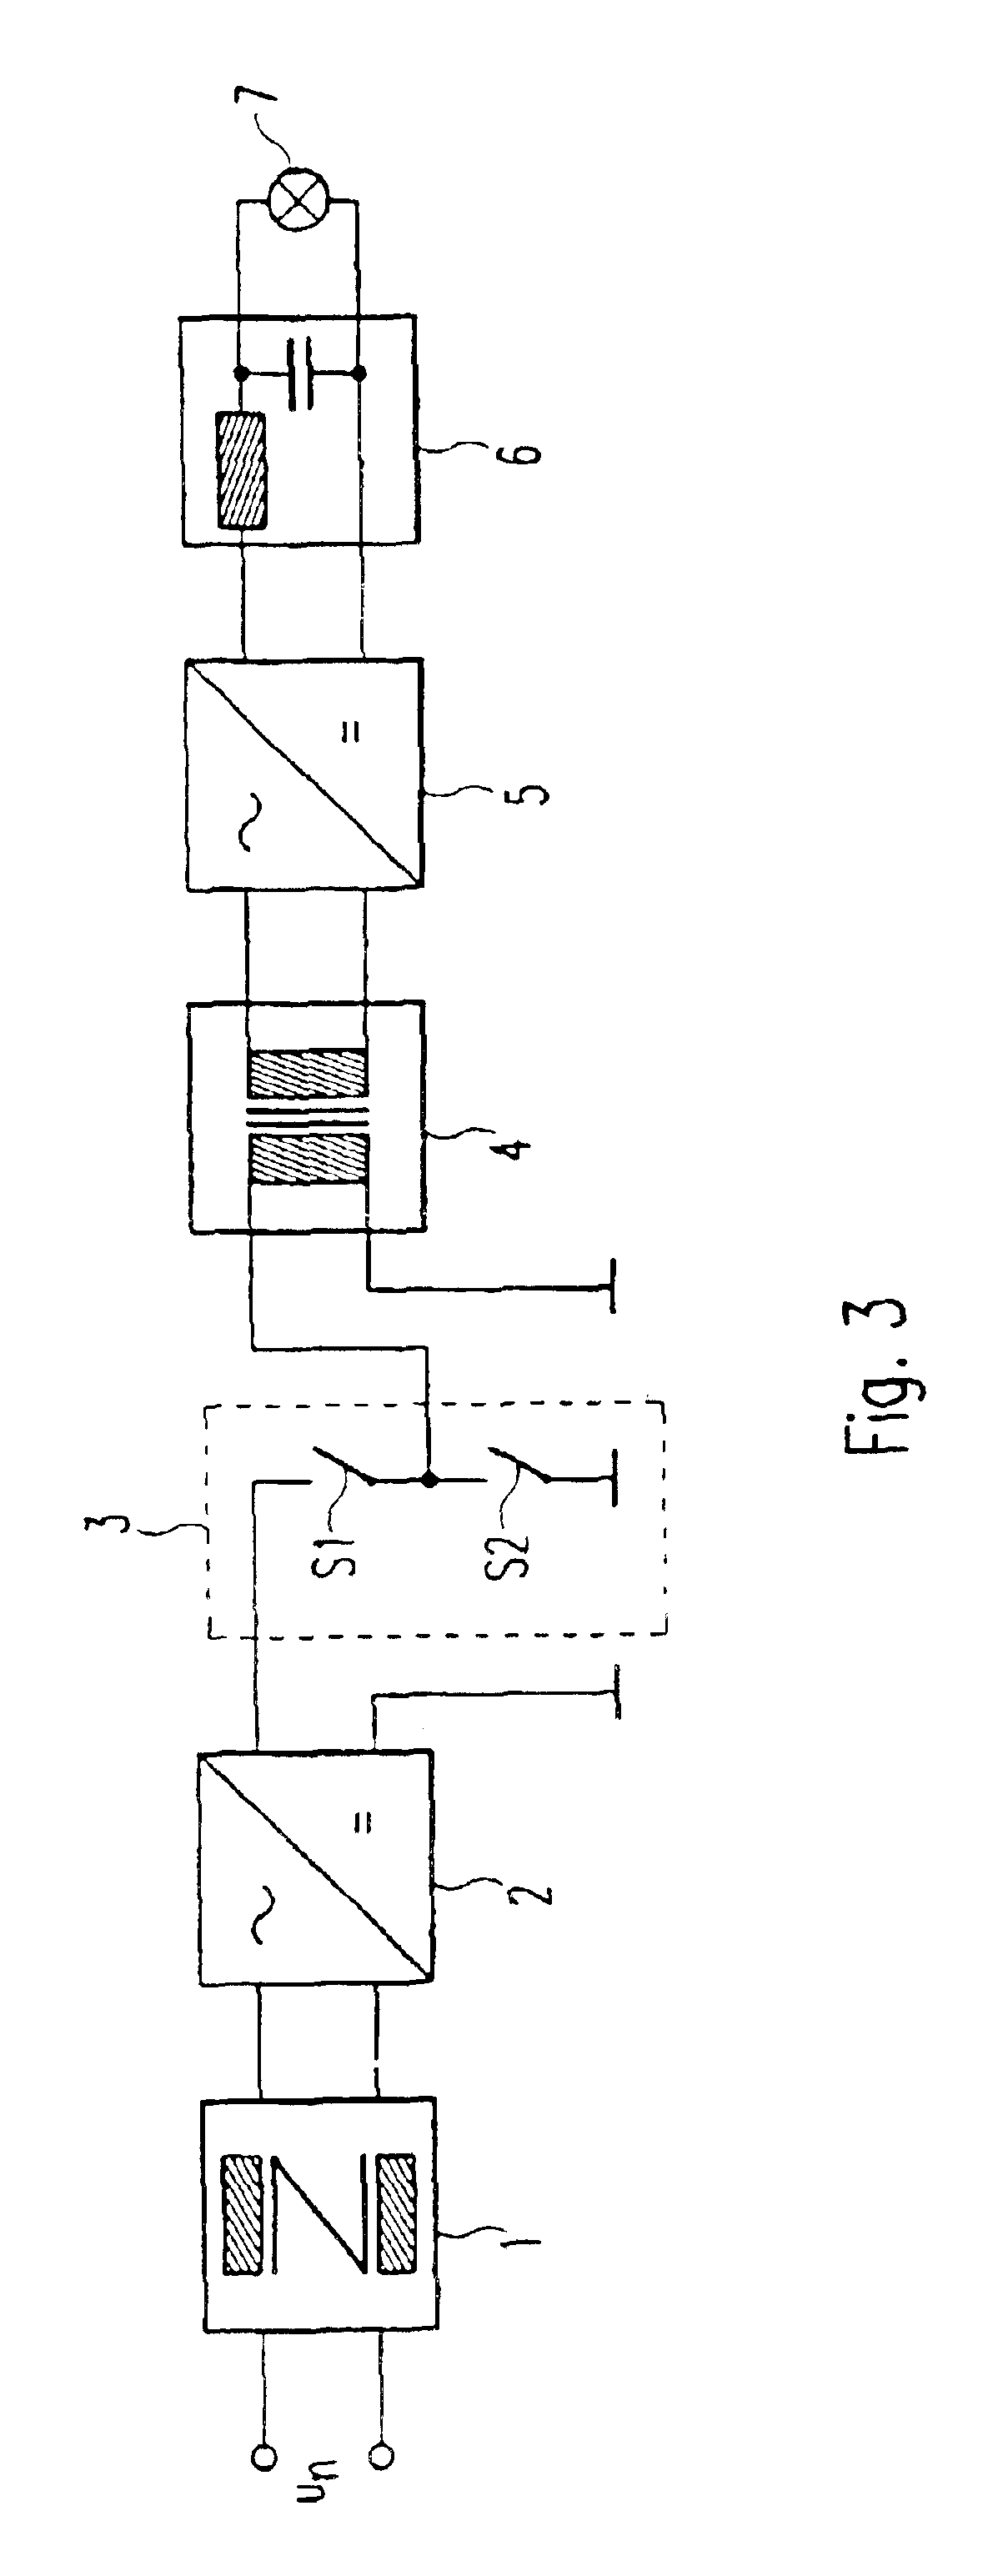 Electronic ballast and electronic transformer